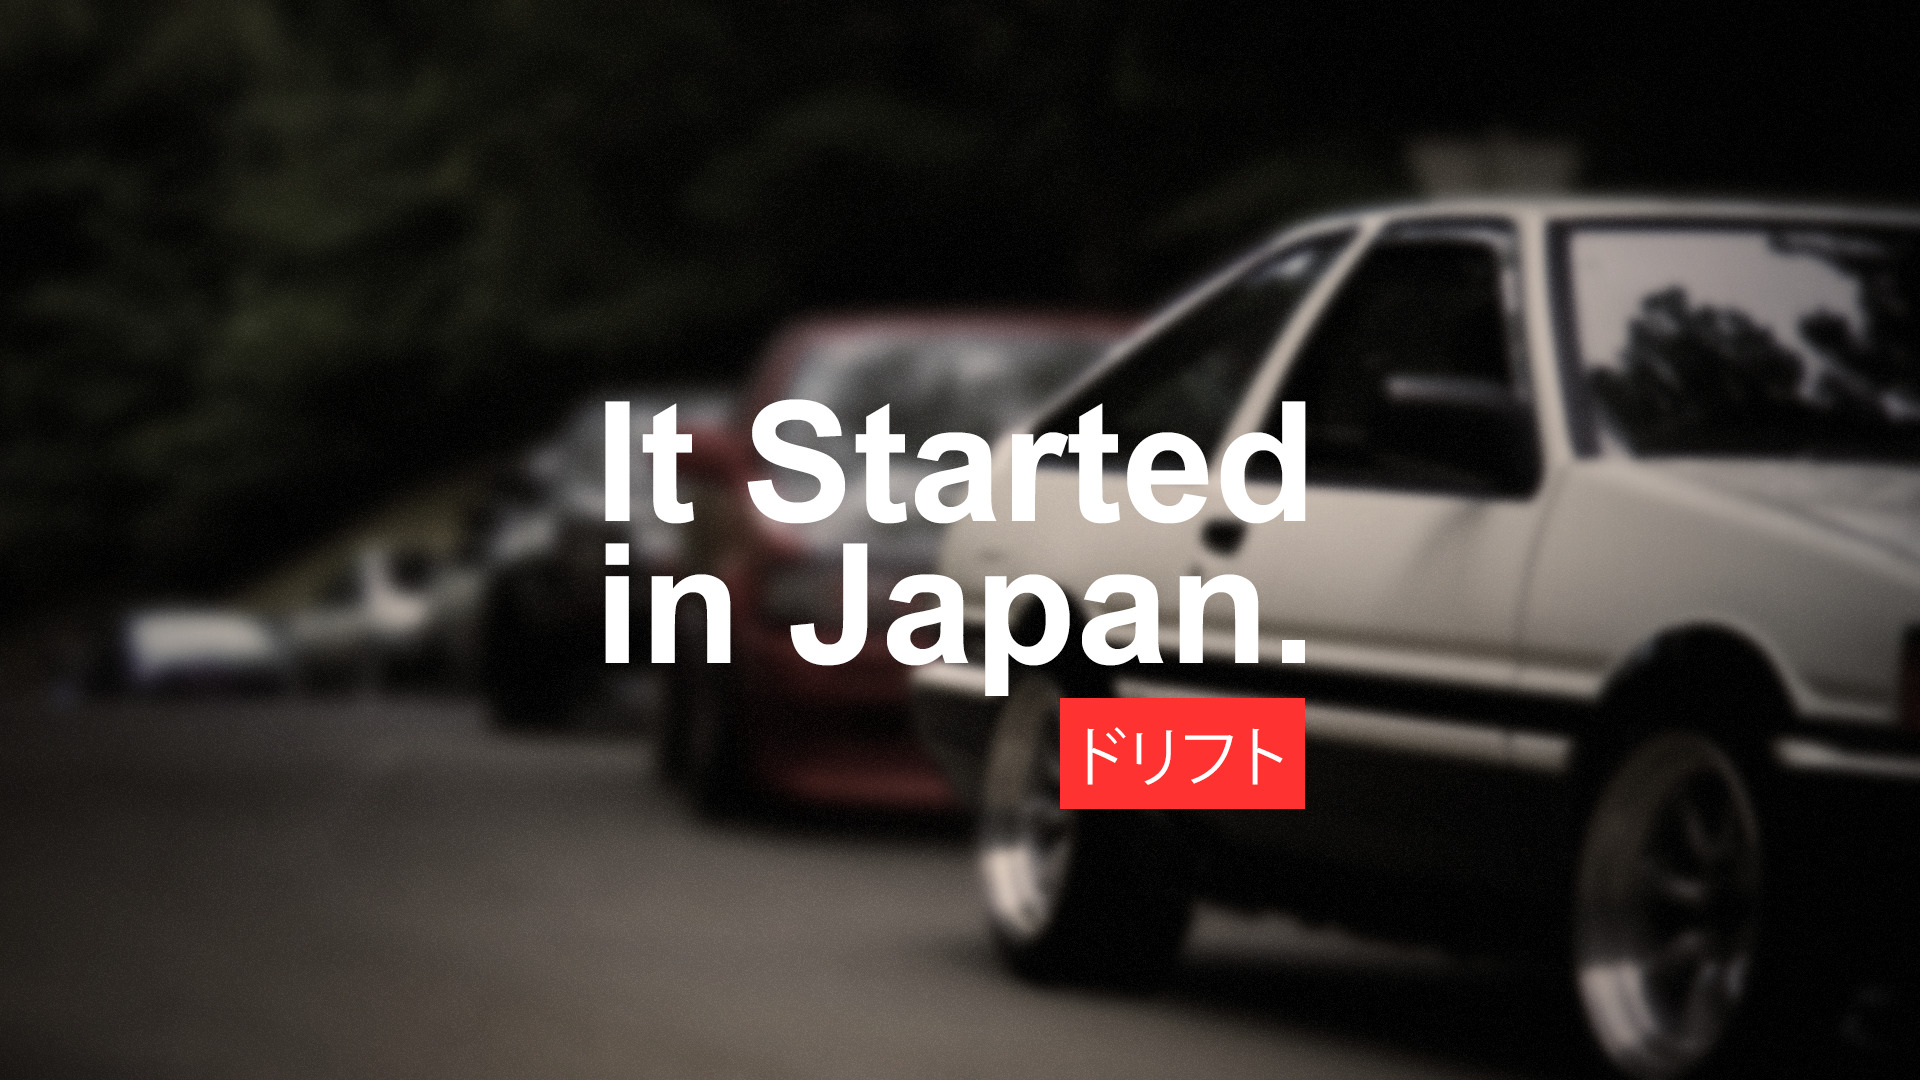 car, Japan, Drift, Drifting, Racing, Vehicle, Japanese Cars, Import, Tuning, Modified, Toyota, AE86, Toyota AE86, Initial D Wallpaper